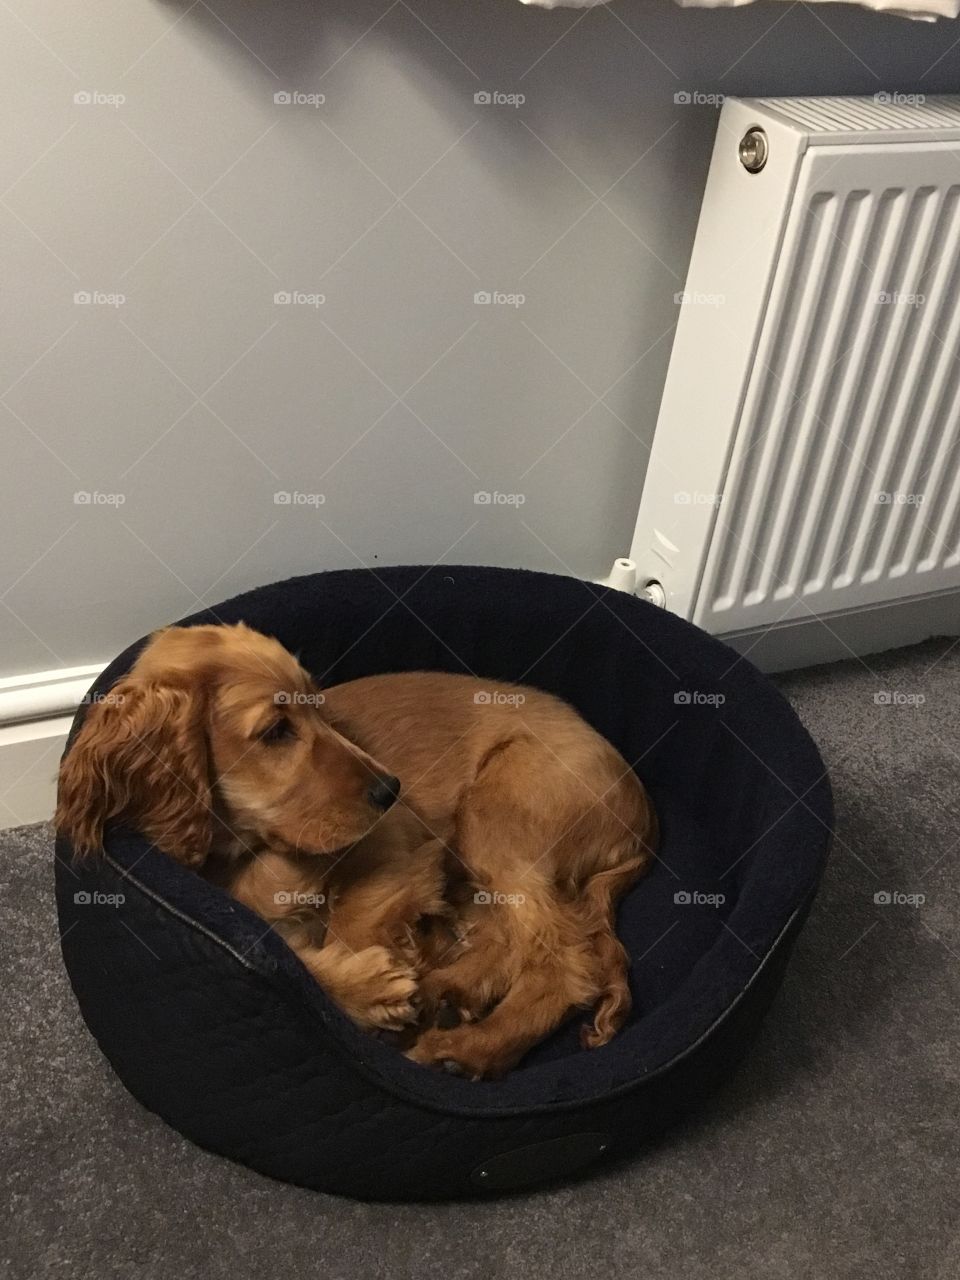 Cocker spaniel all curled up in his bed. Goodnight little rascal. 